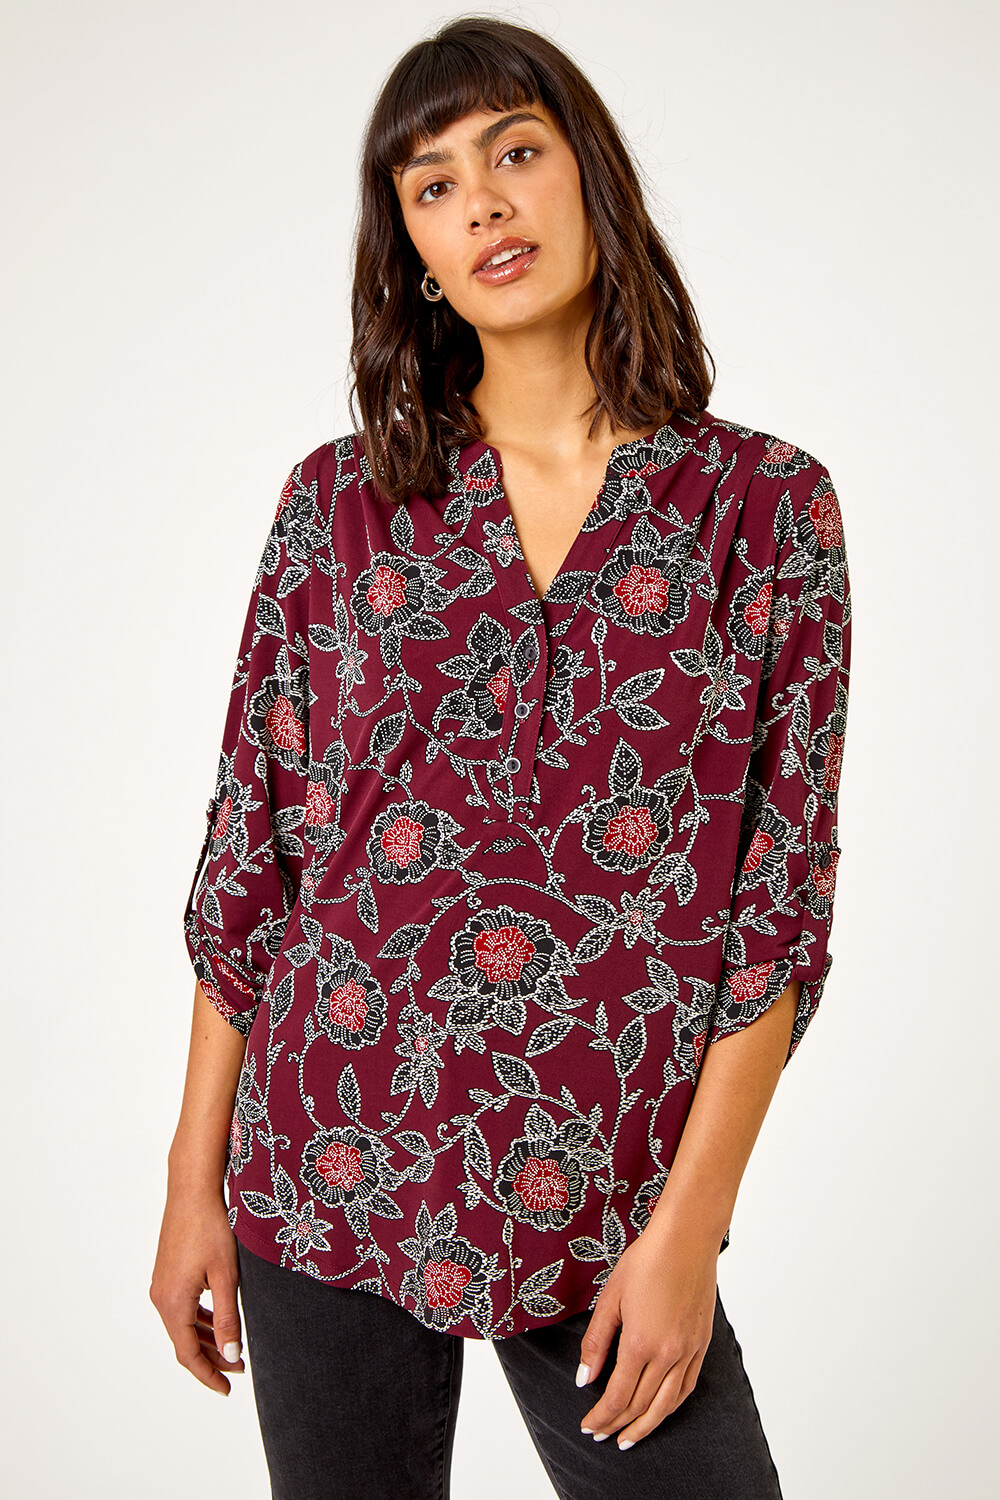 Wine Textured Floral Print Stretch Shirt , Image 4 of 5